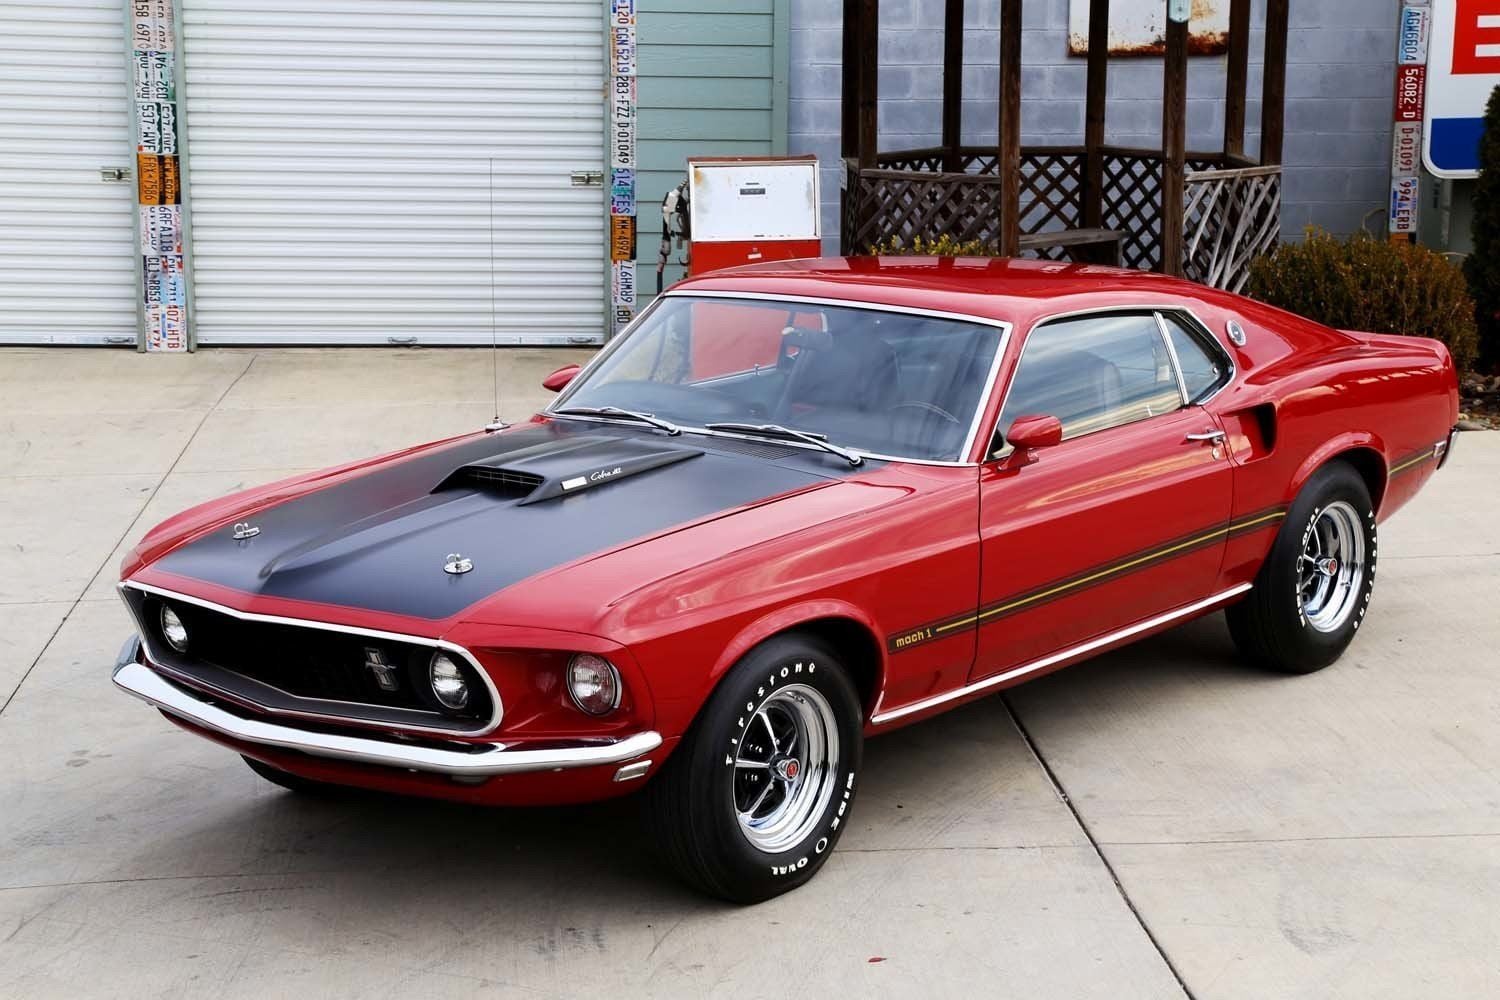 1969 Mach 1 Take 2 Restored - The Mustang Source - Ford Mustang Forums